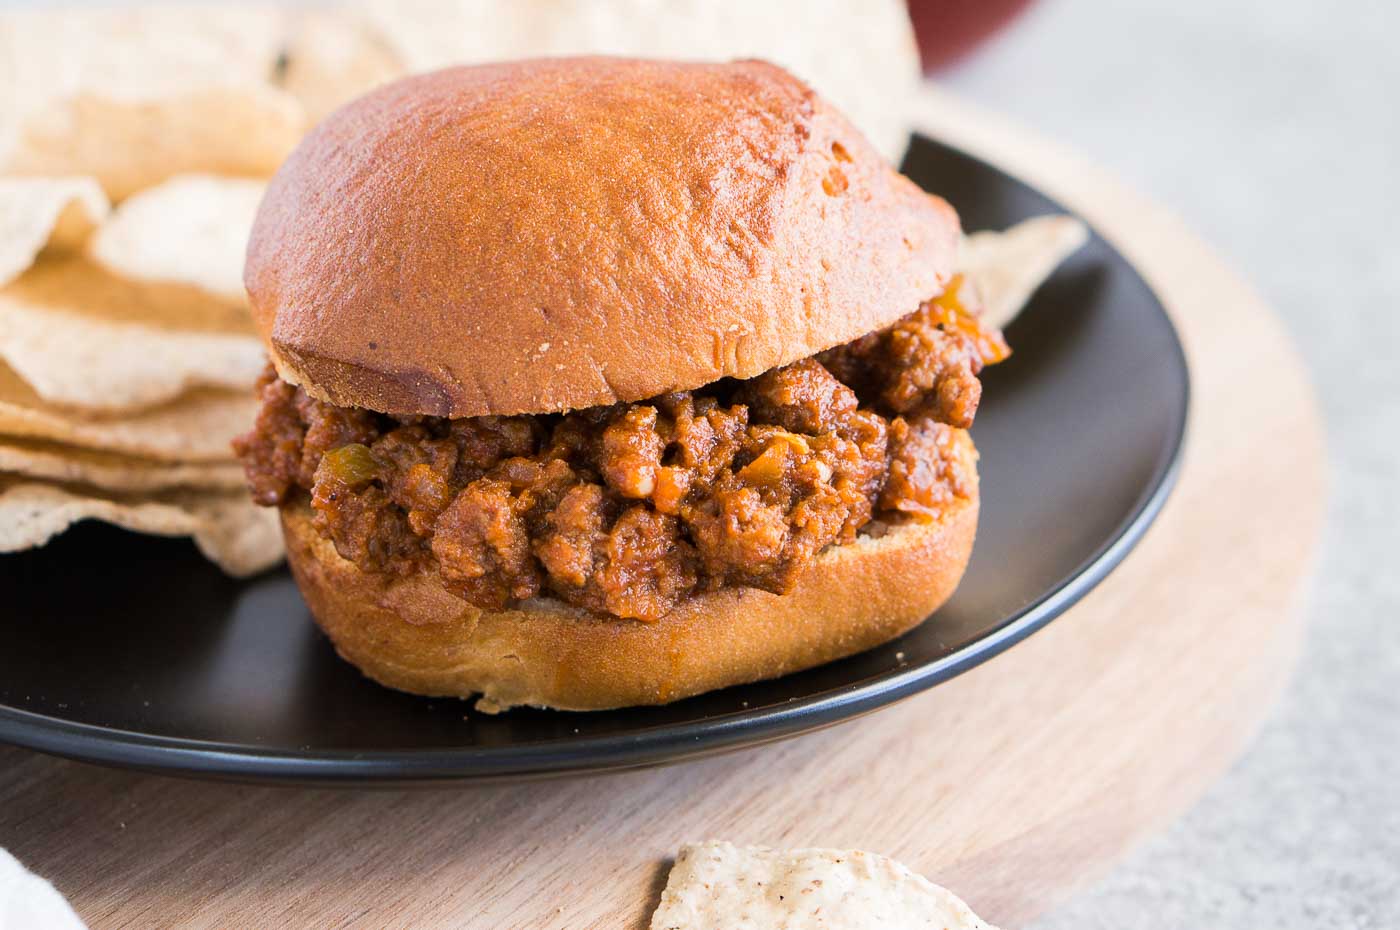 close up image of sloppy joes and chips on a plate